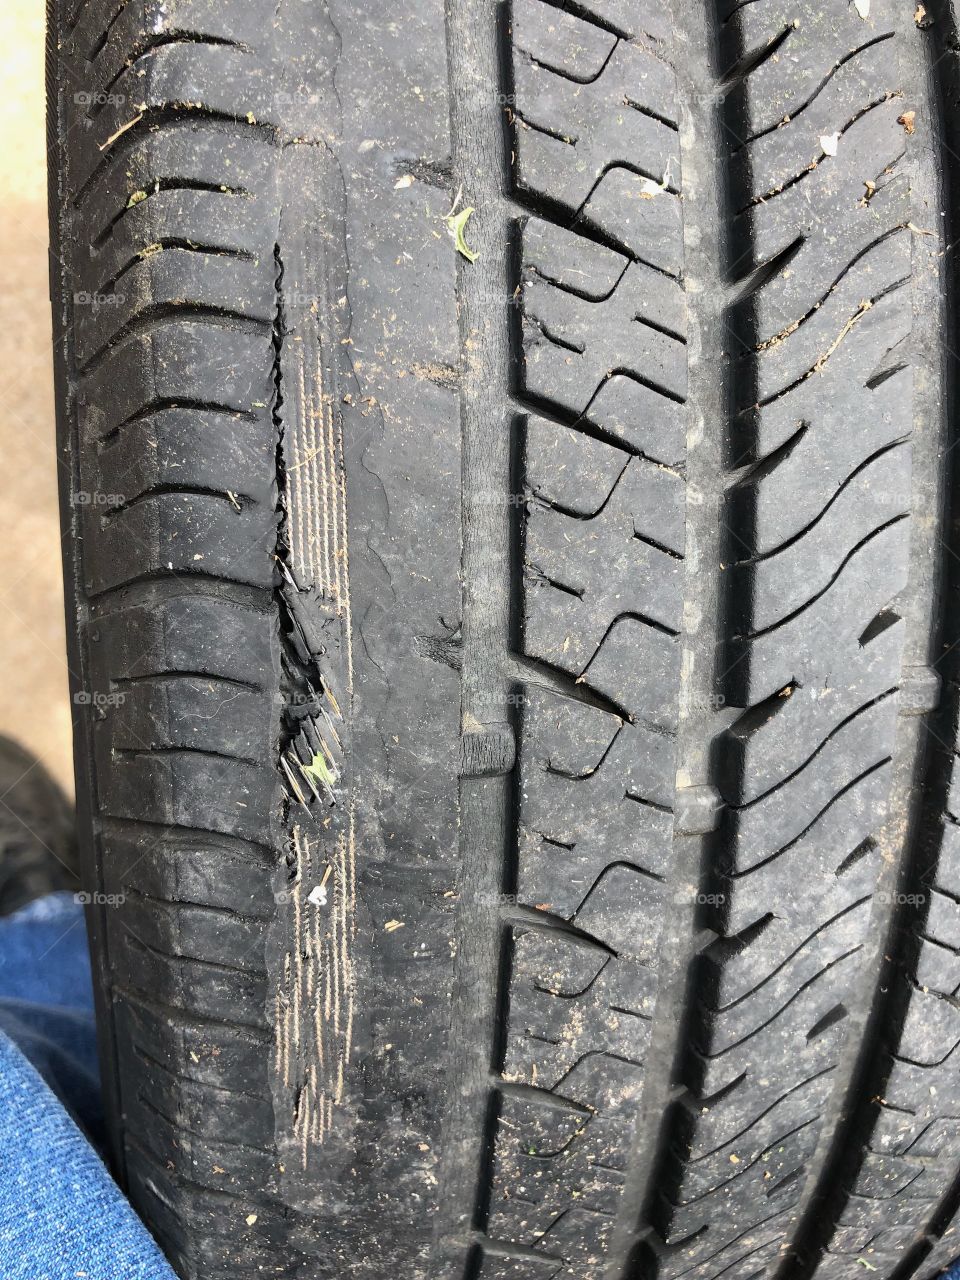 My tire is bad